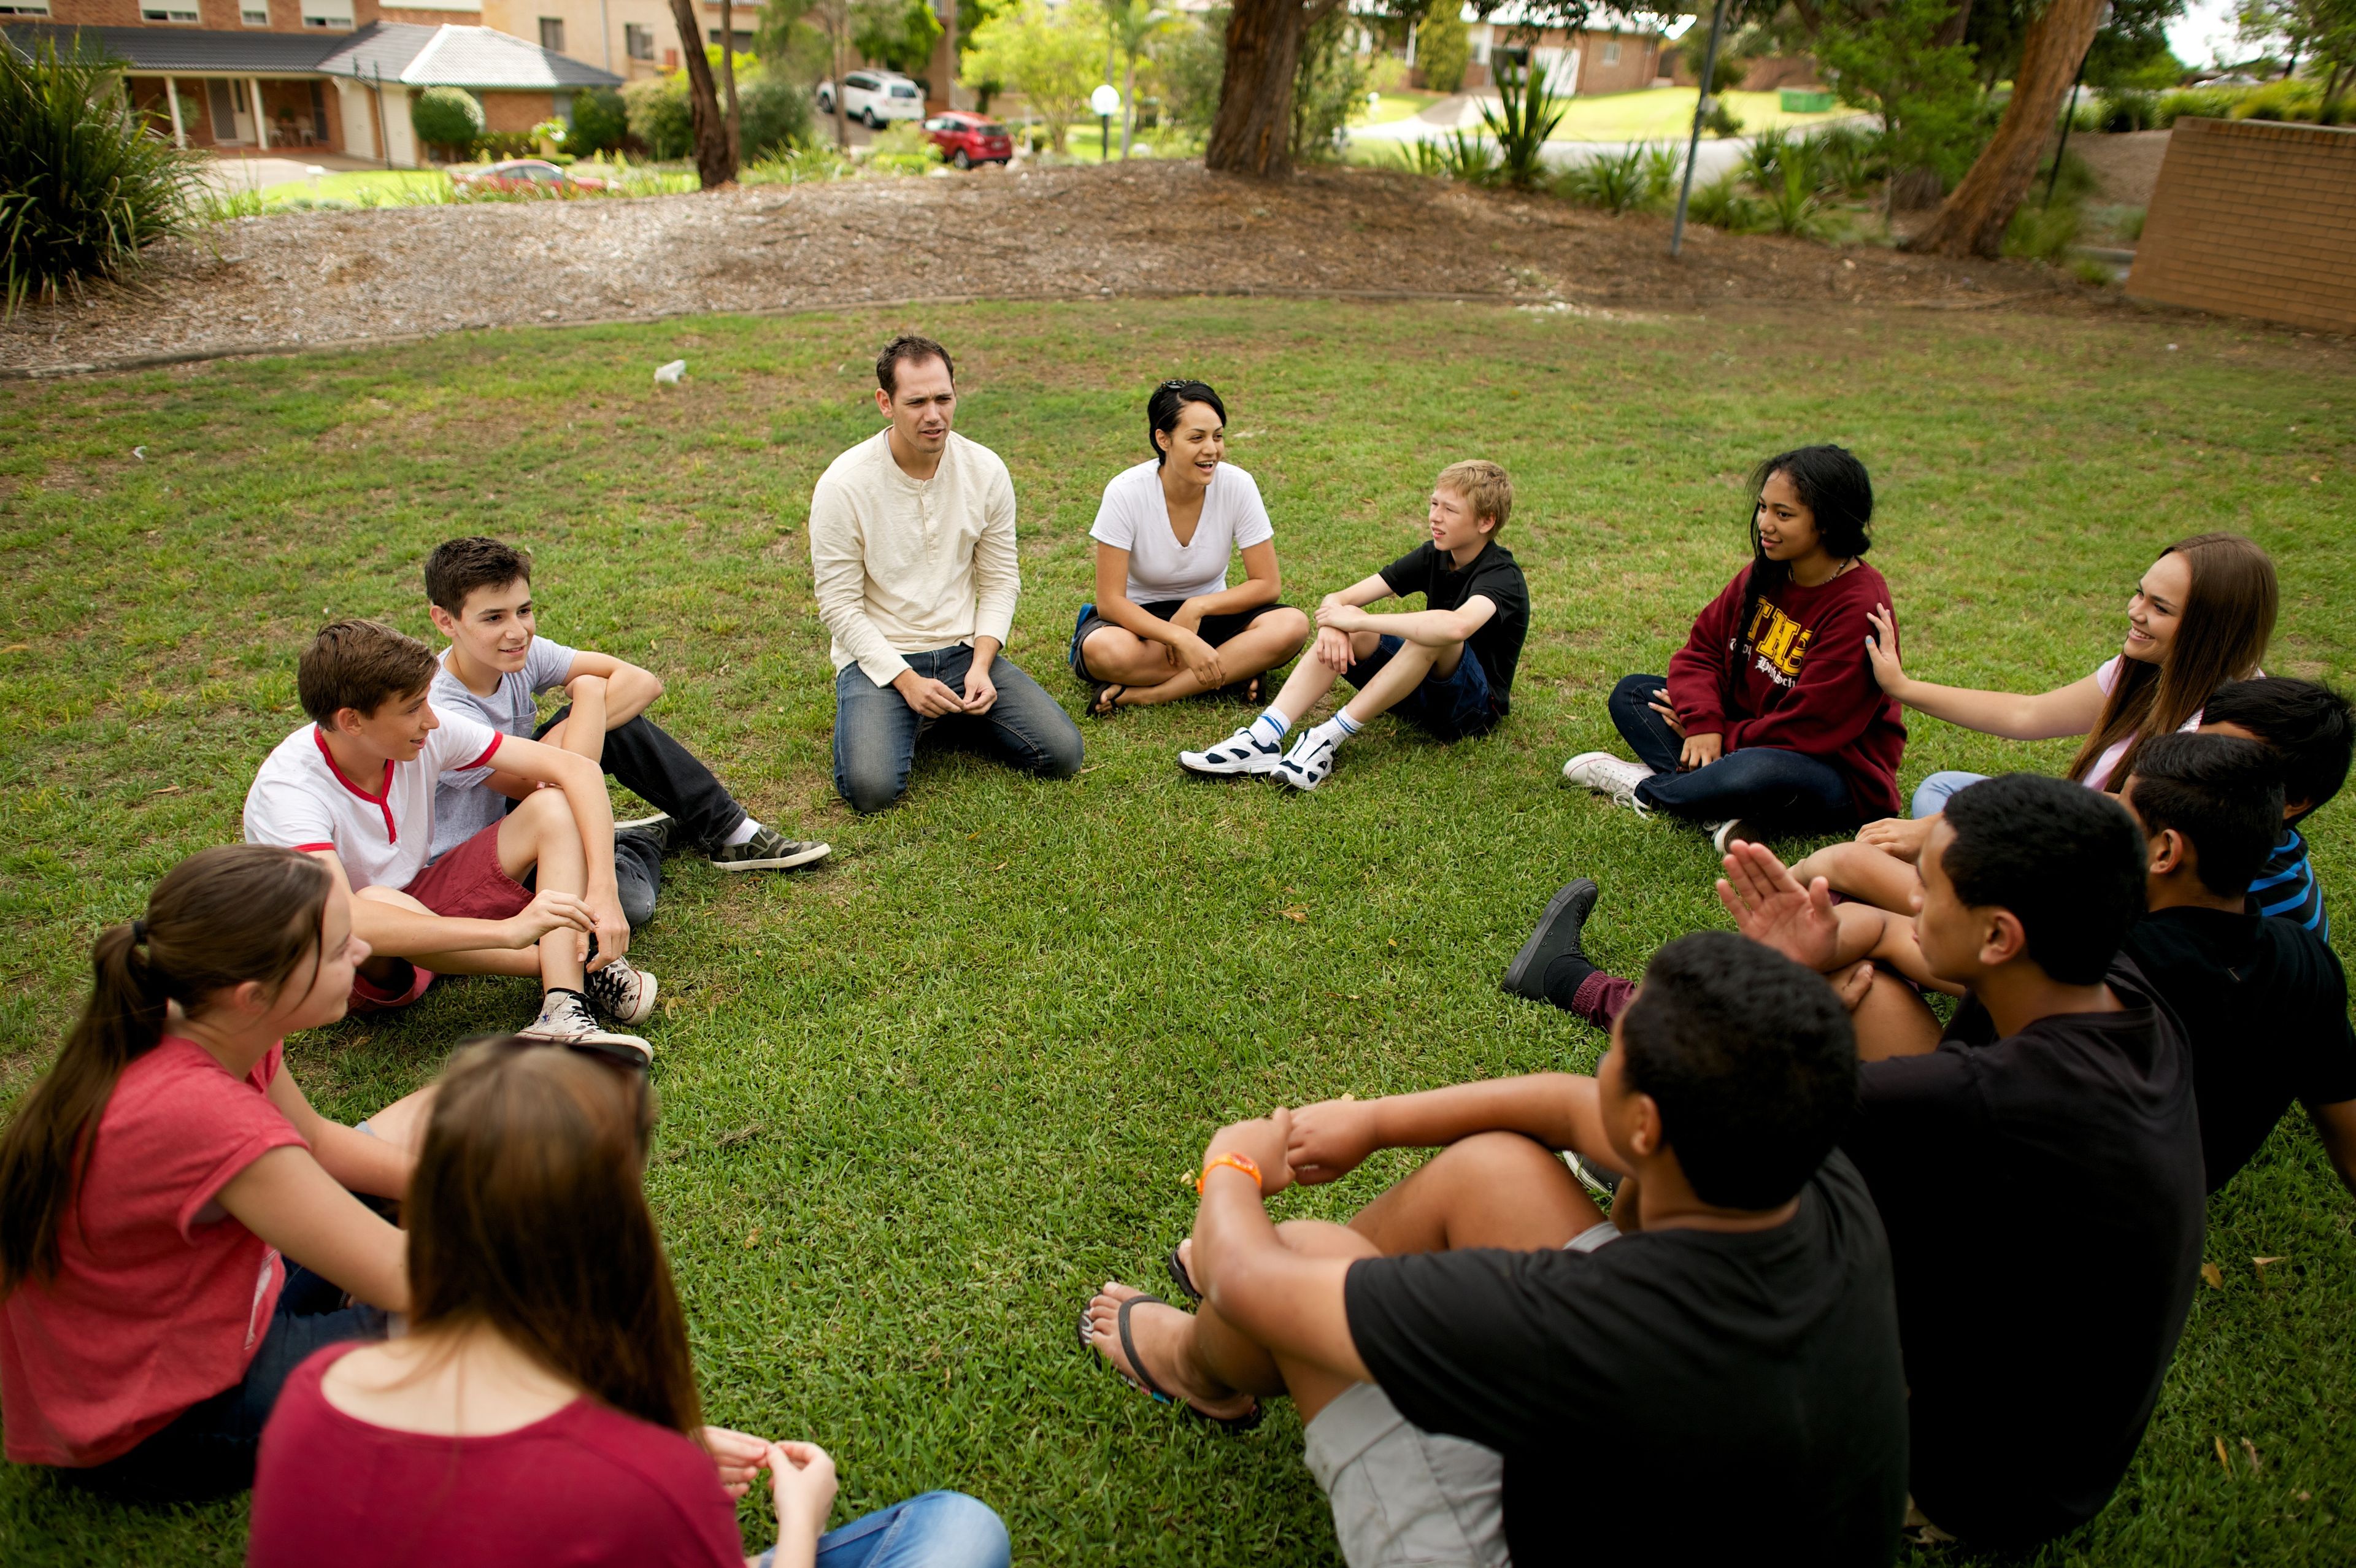 A group of youth sitting in a circle in a yard and playing games together.